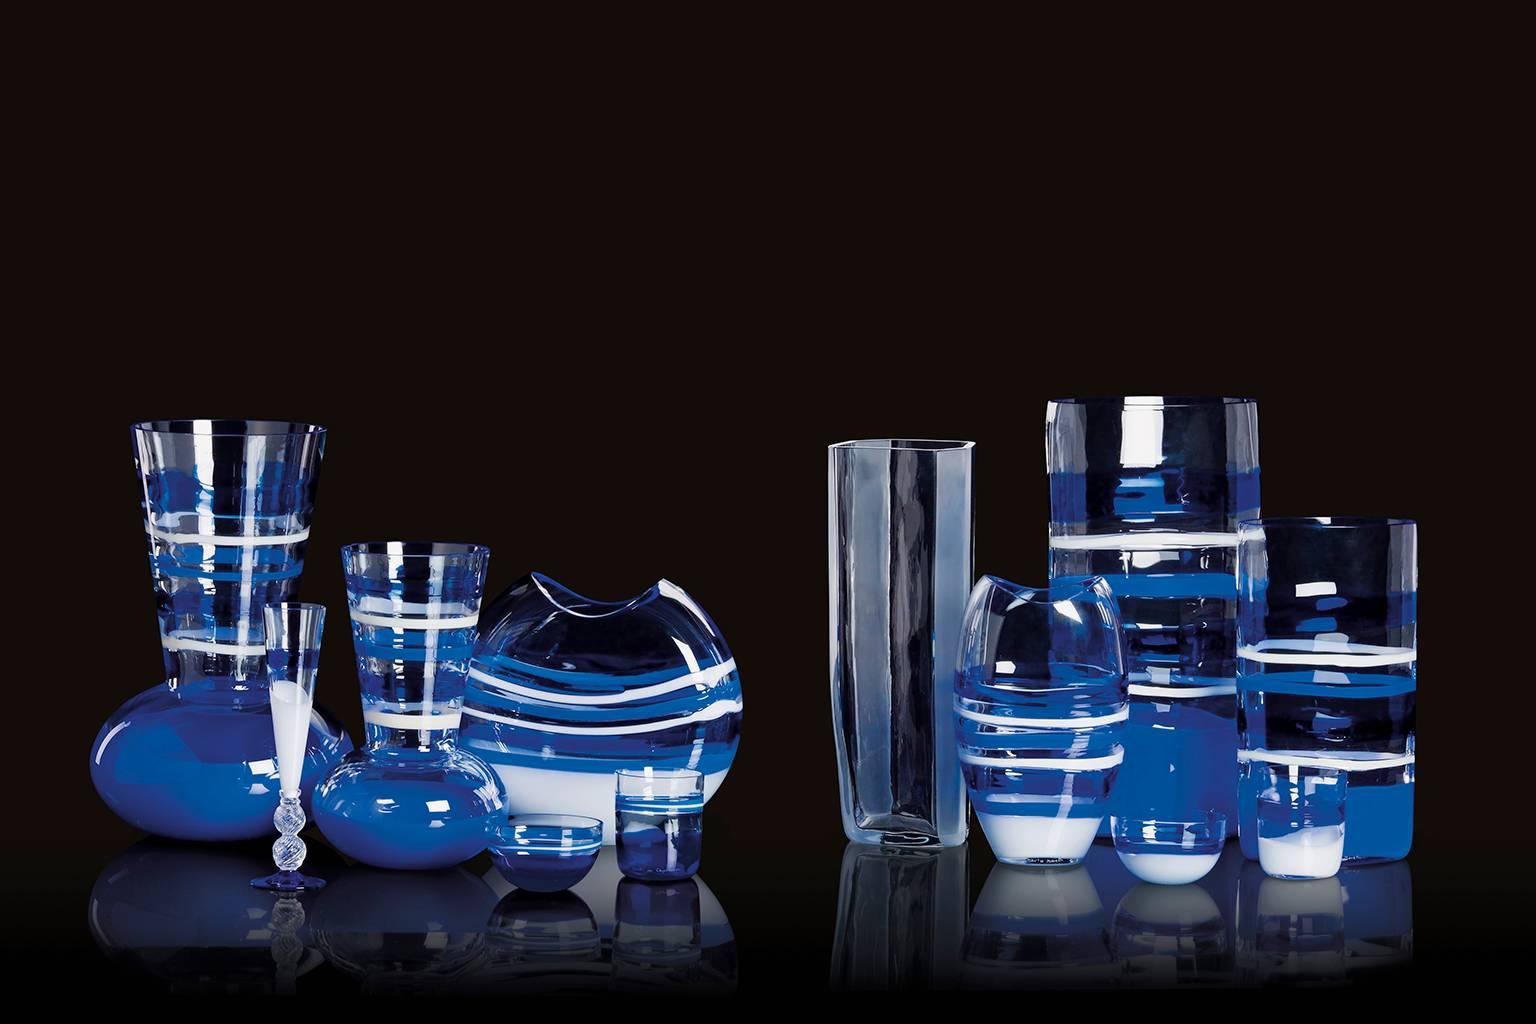 Arco Carlo Moretti contemporary Murano mouth blown glass vase in blue, white and clear glass.

Carlo Moretti: An artisan factory

Strolling afoot through the foundations of Murano, the visitor provided with refined sensitivity, lost in a myriad